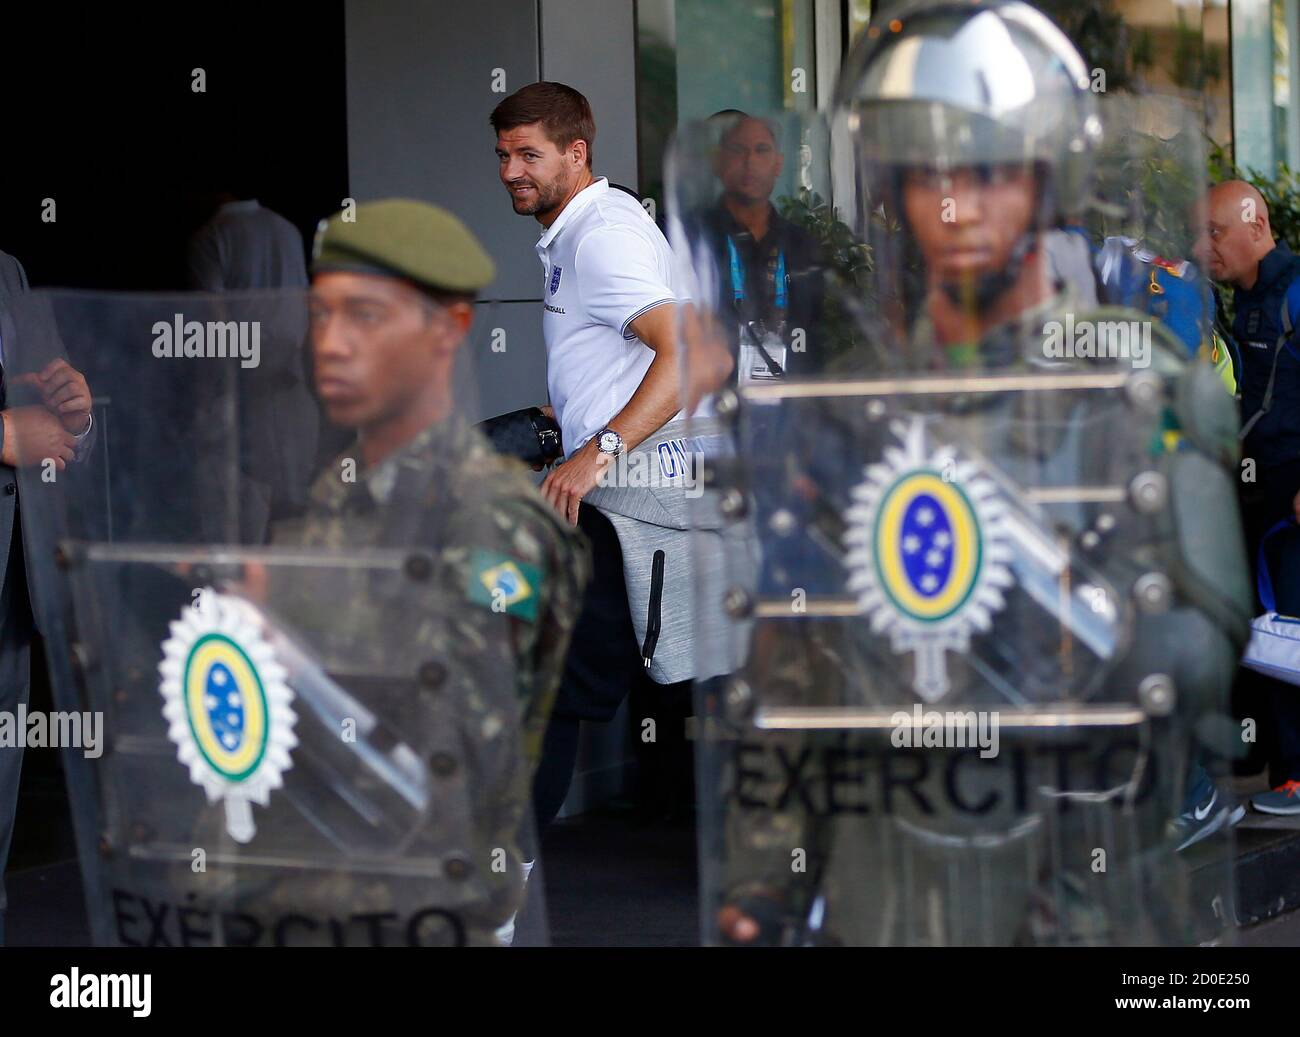 England's Steven Gerrard walks past Brazilian army personal as he arrives at the team hotel in Rio de Janeiro June 8, 2014. REUTERS/Eddie Keogh (BRAZIL - Tags: SPORT SOCCER WORLD CUP) Stock Photo